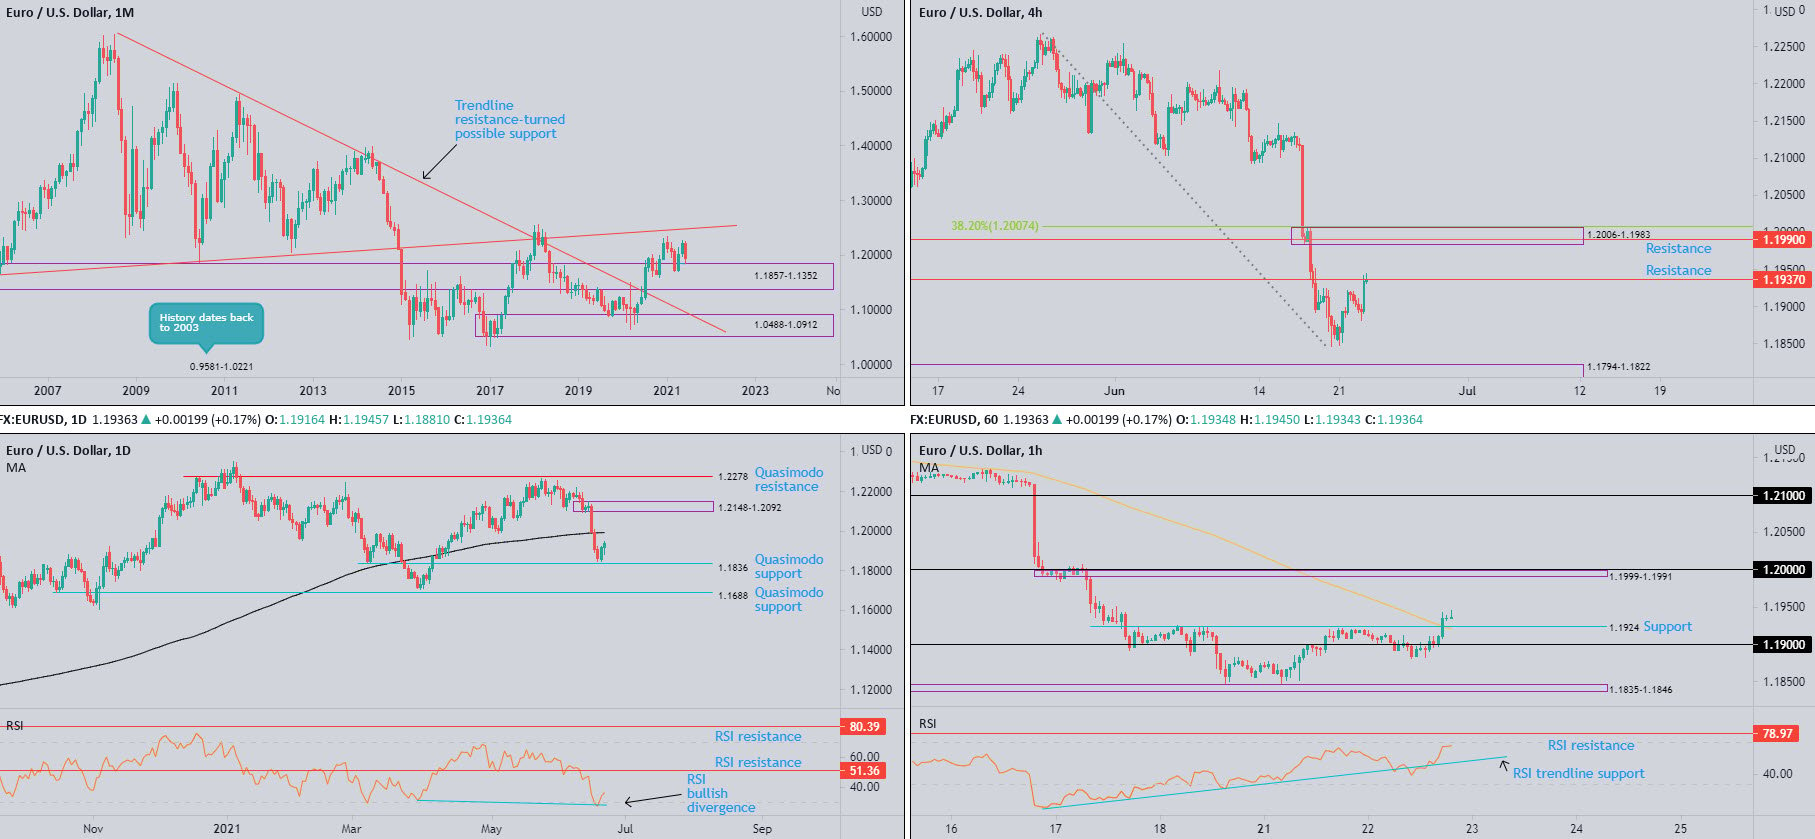 June 23rd 2021: AUD/USD Tests Daily Resistance at $0.7563, Dovetailing with the 200-day SMA, FP Markets